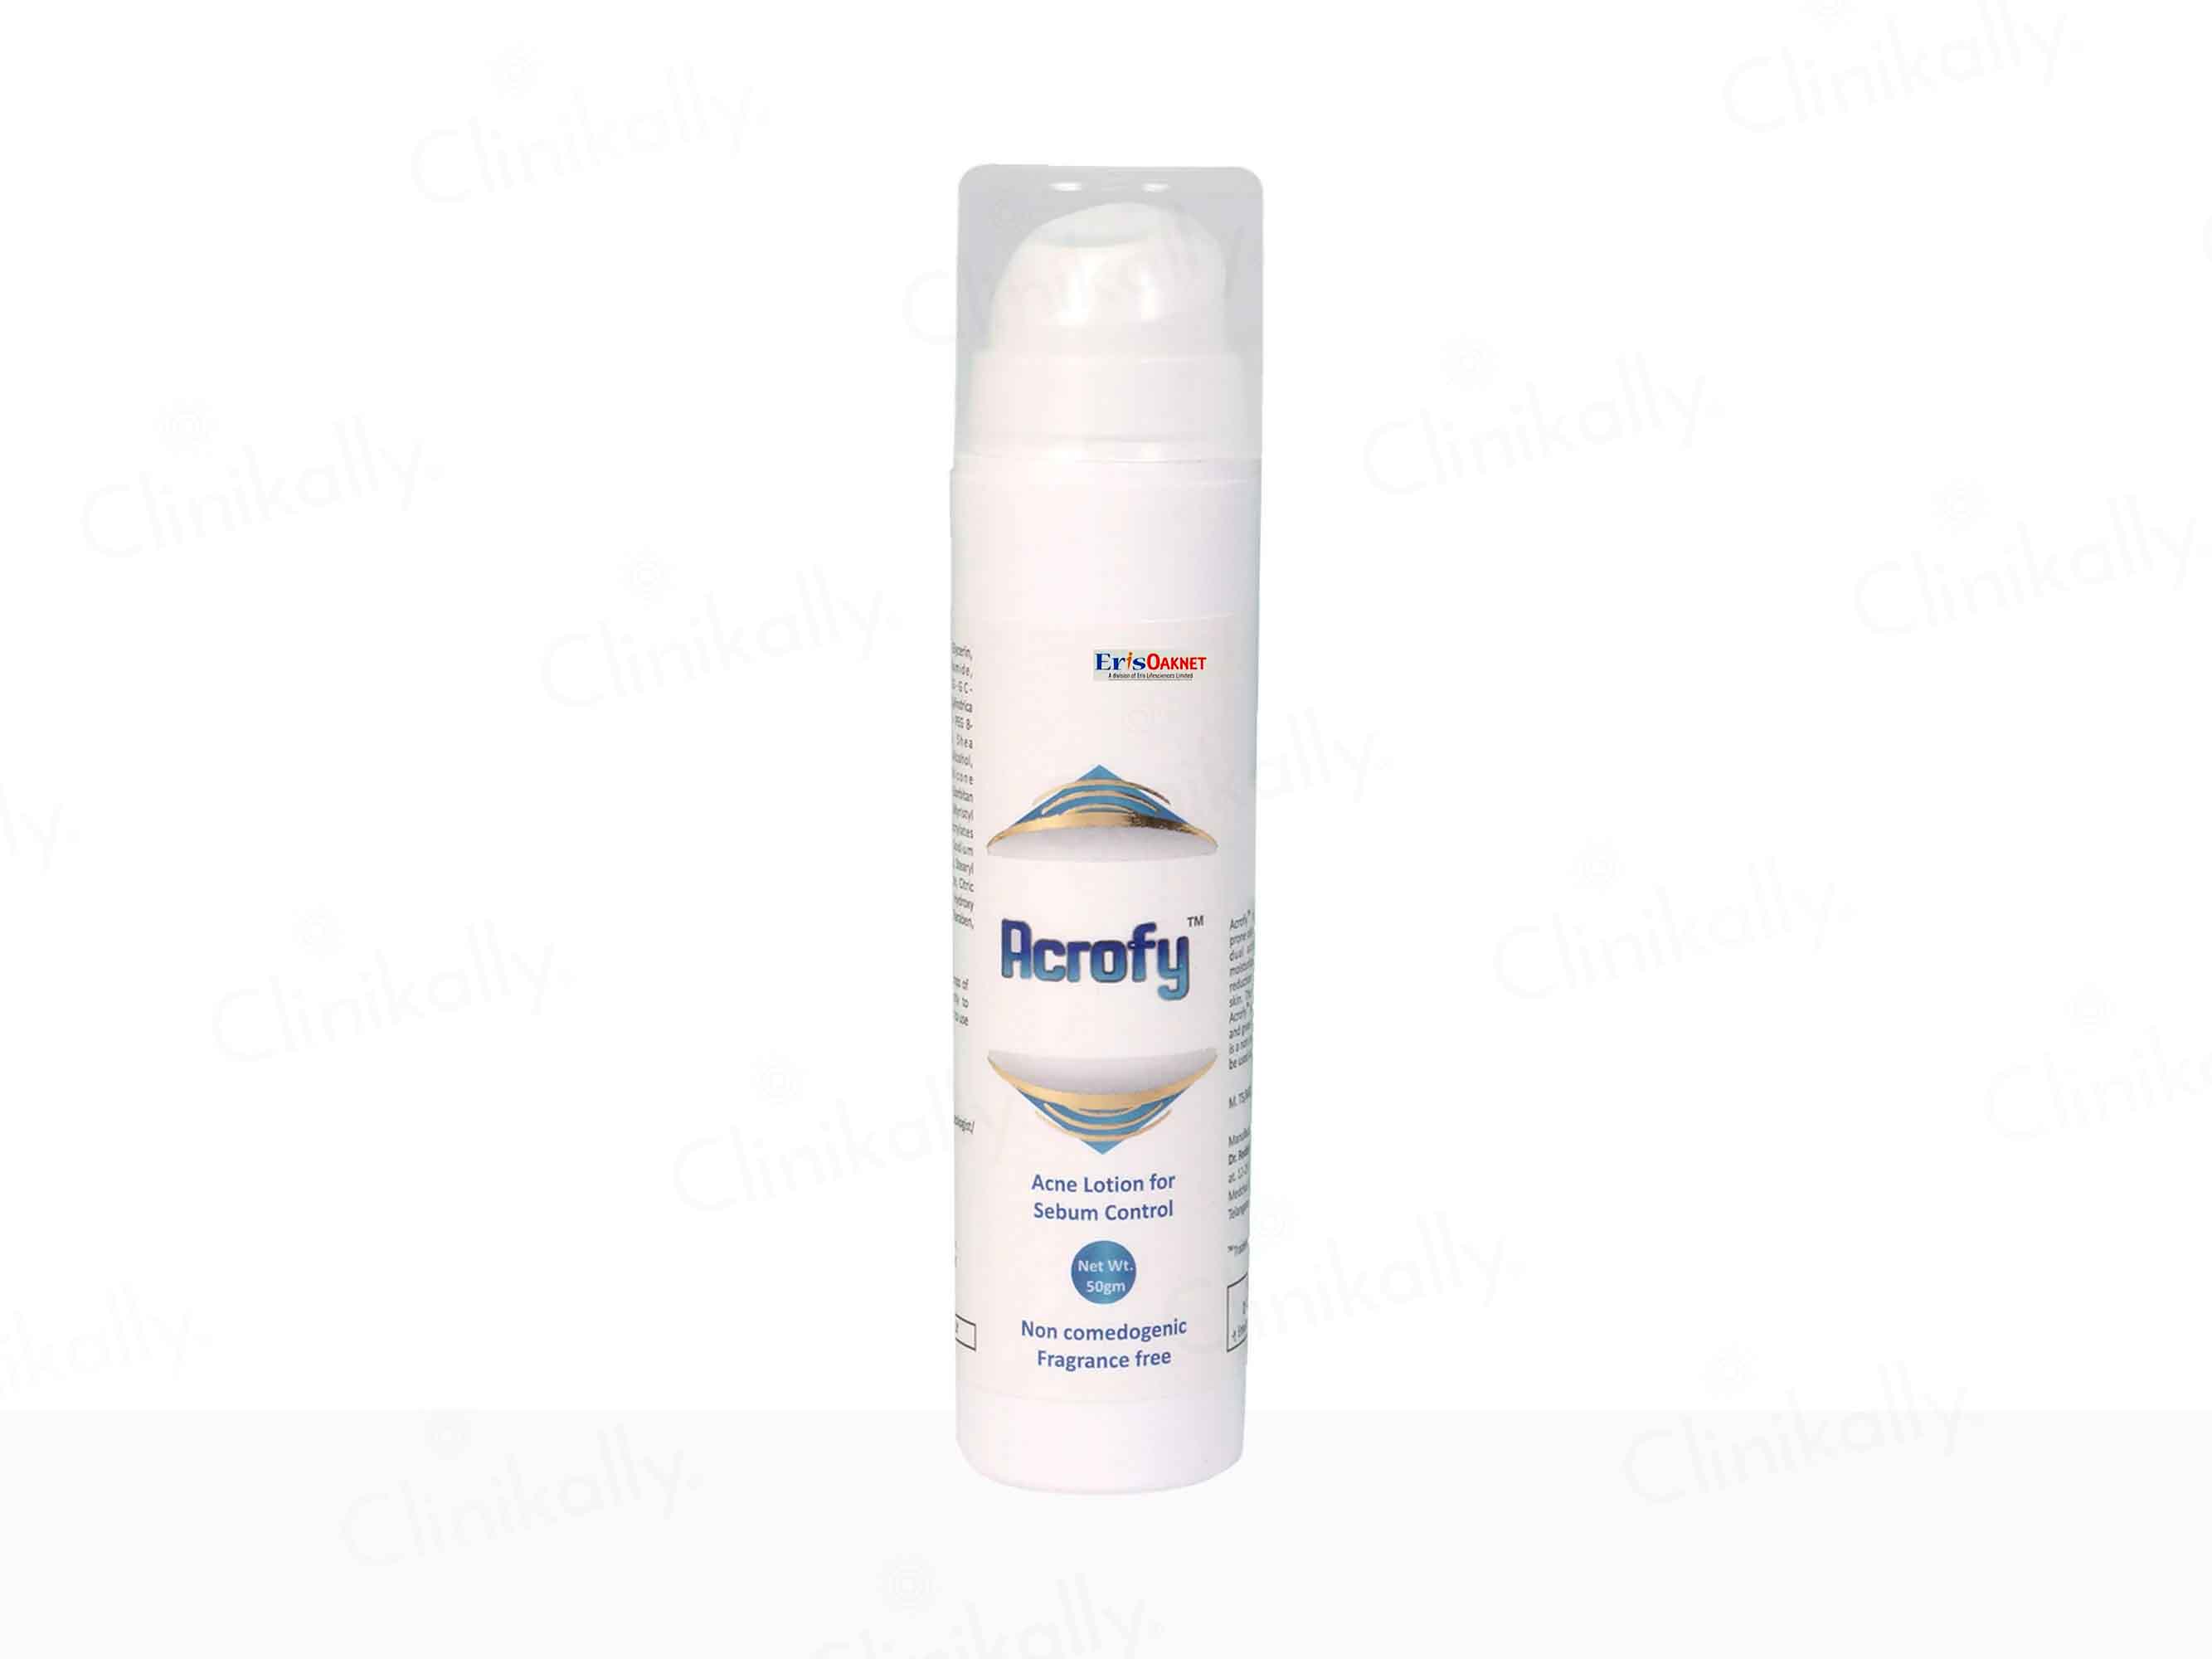 Acrofy Acne Lotion for Sebum Control